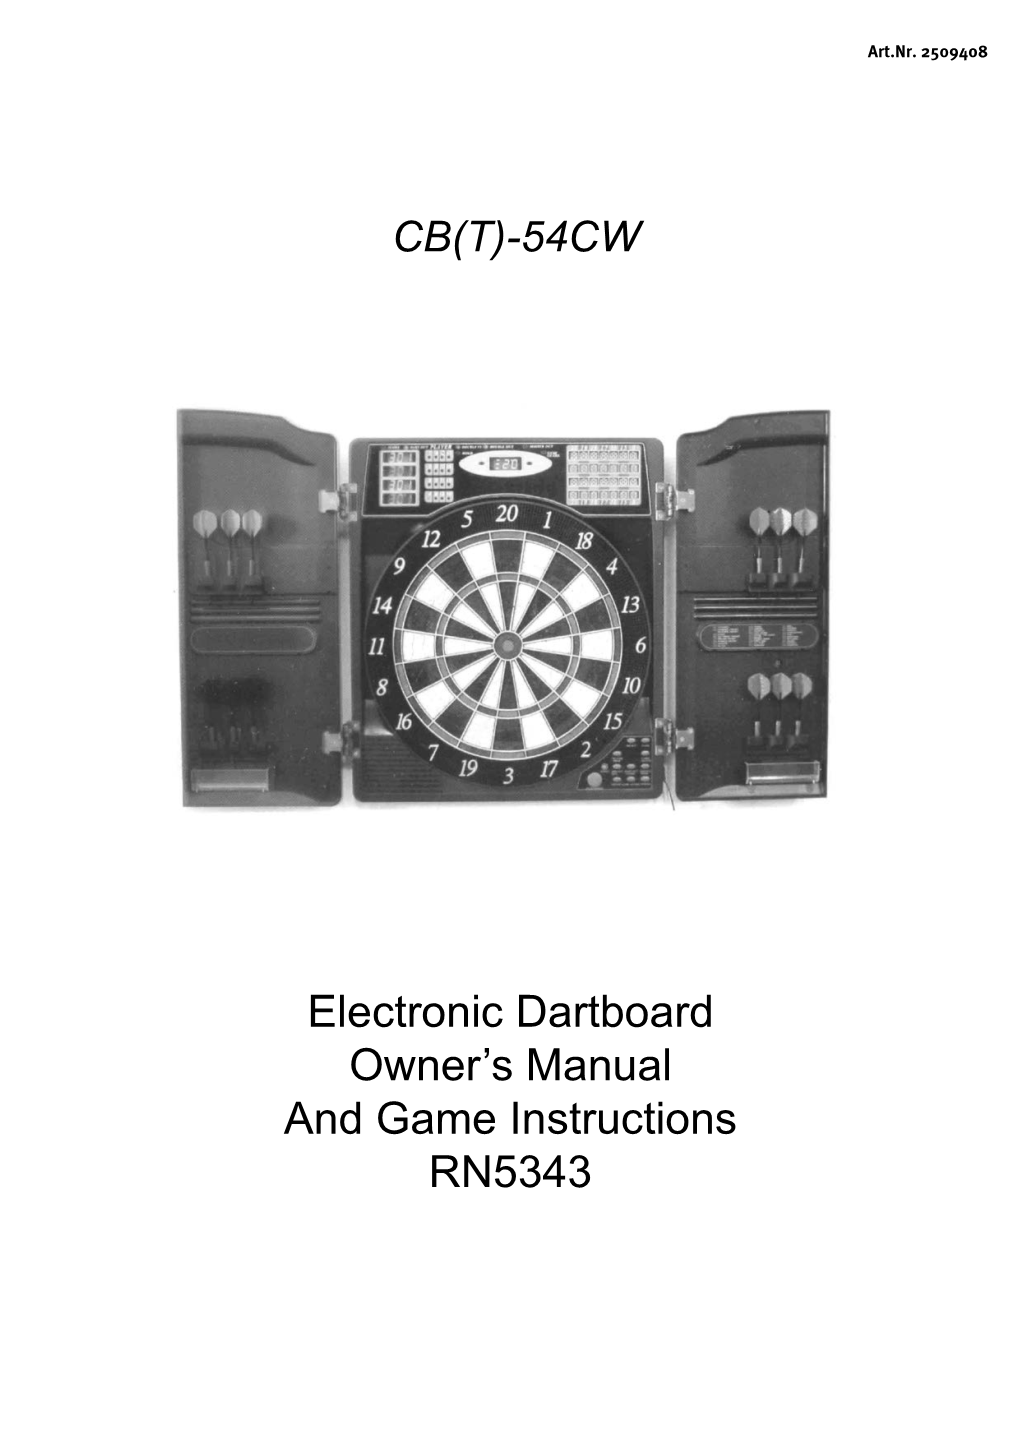 Electronic Dartboard Owner's Manual and Game Instructions RN5343